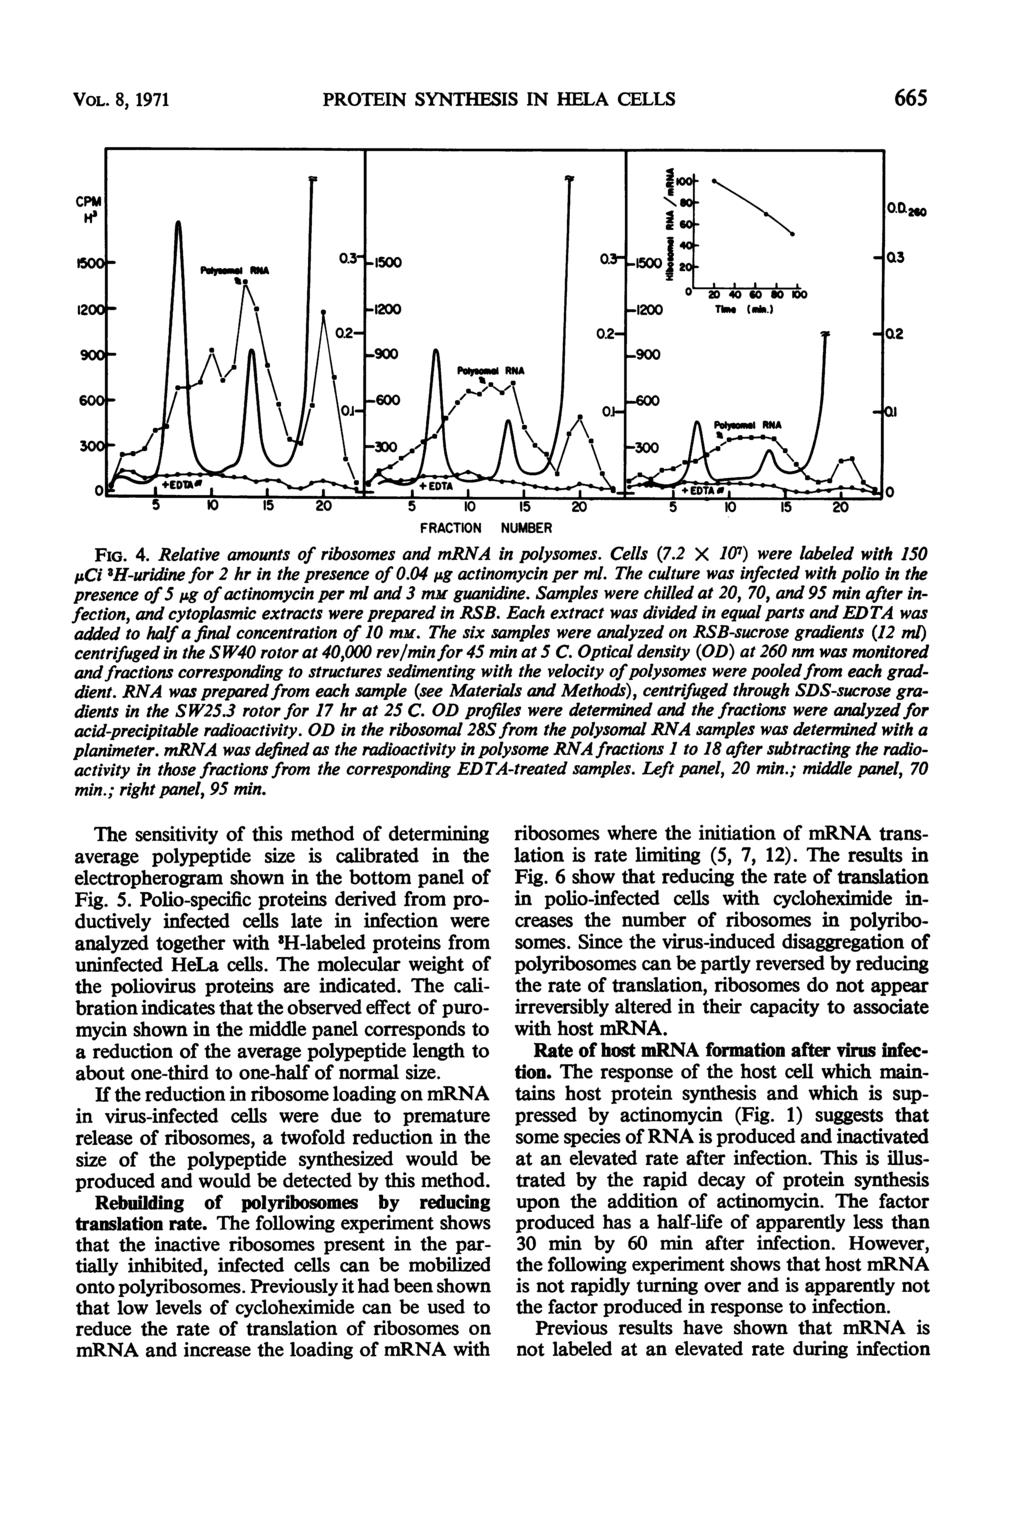 VOL. 8, 1971 PROTEIN SYNTHESIS IN HELA CELLS 665 FRACTION NUMBER FIG. 4. Relative amounts of ribosomes and mrna in polysomes. Cells (7.